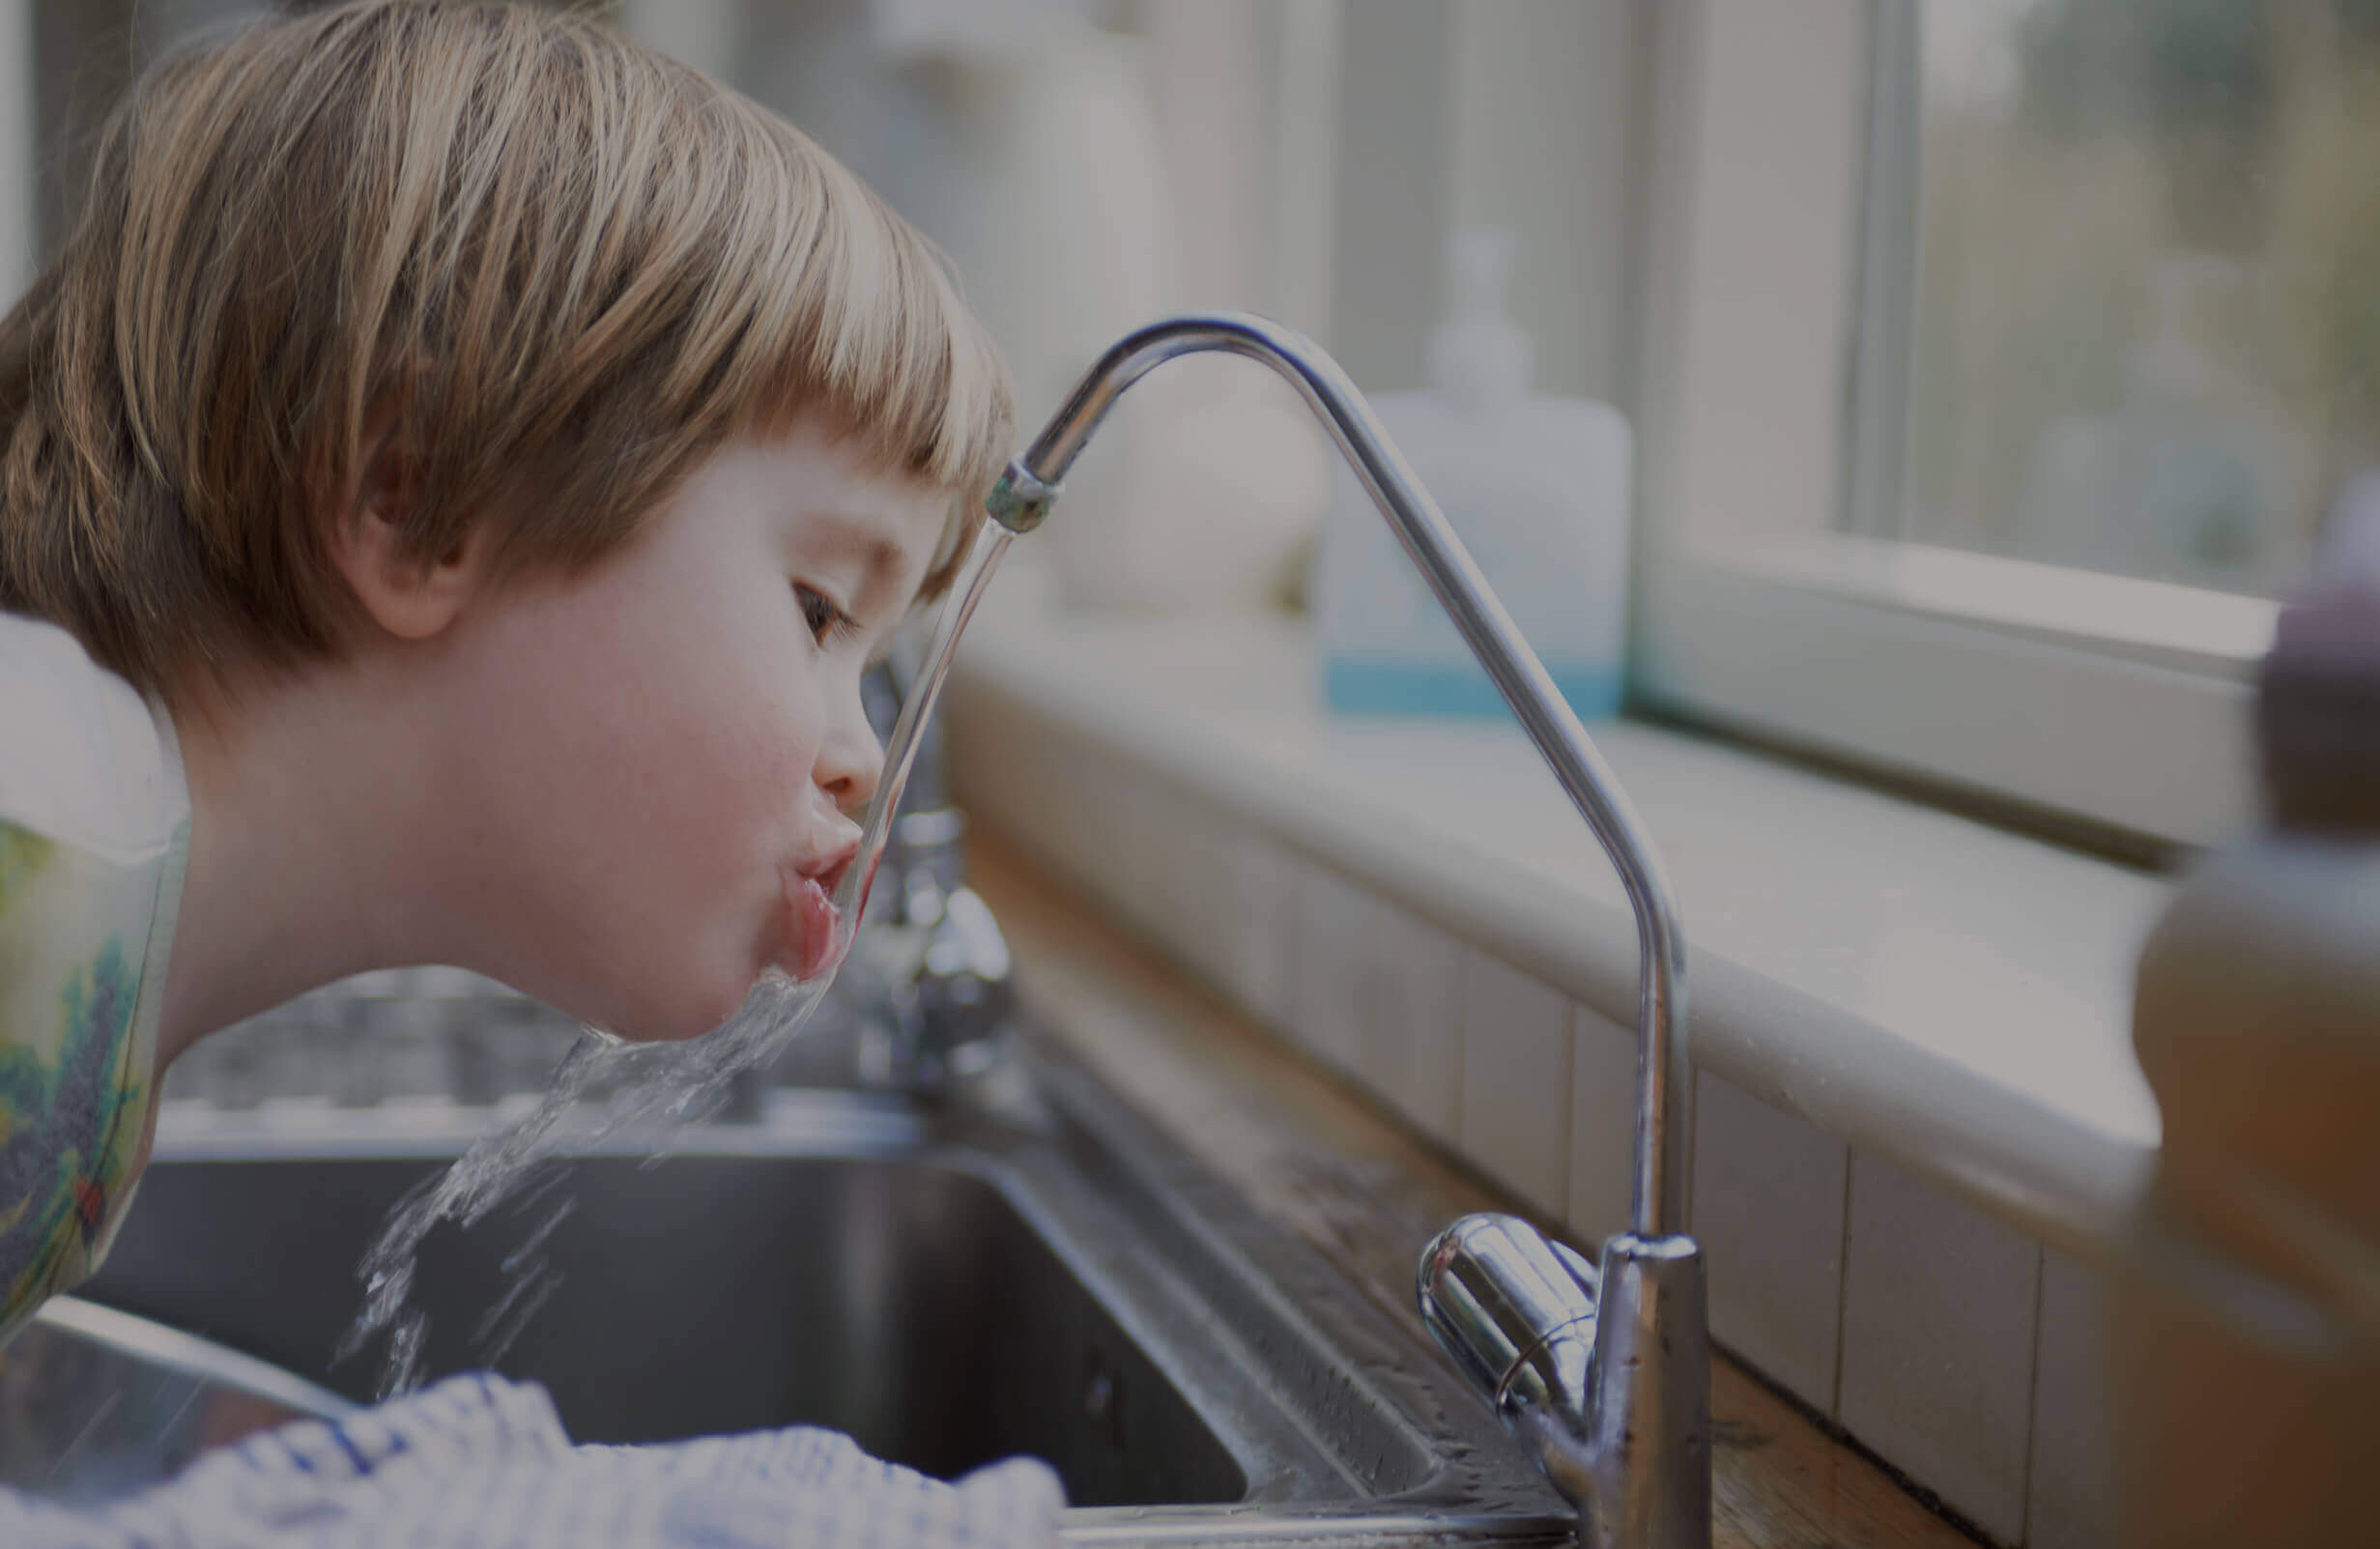 A child drinking from a faucet